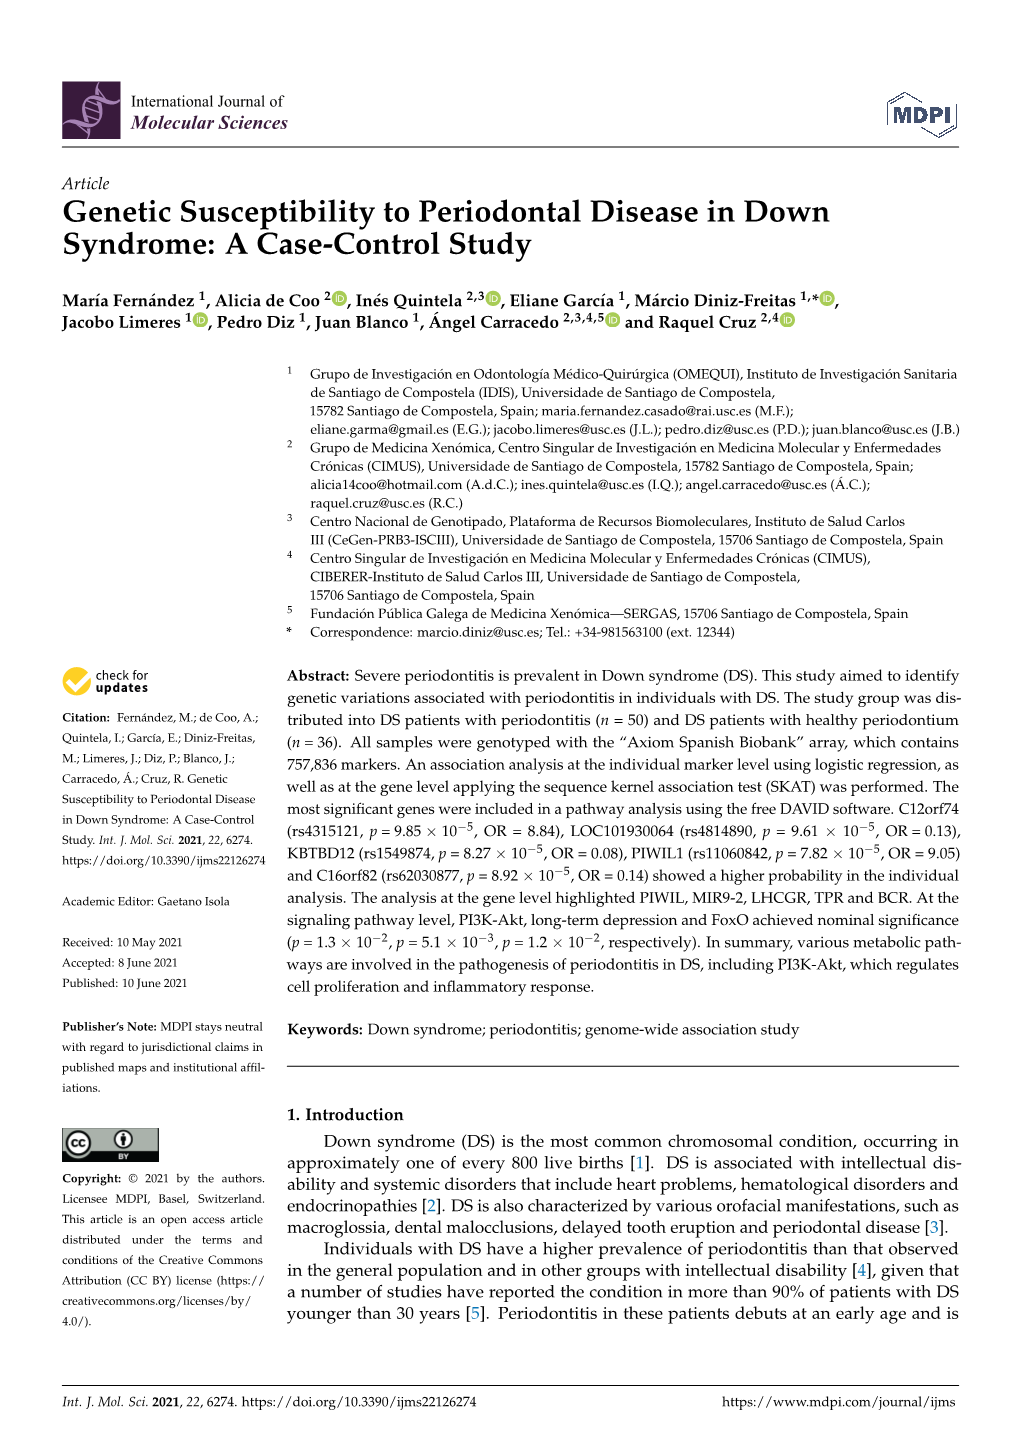 Genetic Susceptibility to Periodontal Disease in Down Syndrome: a Case-Control Study